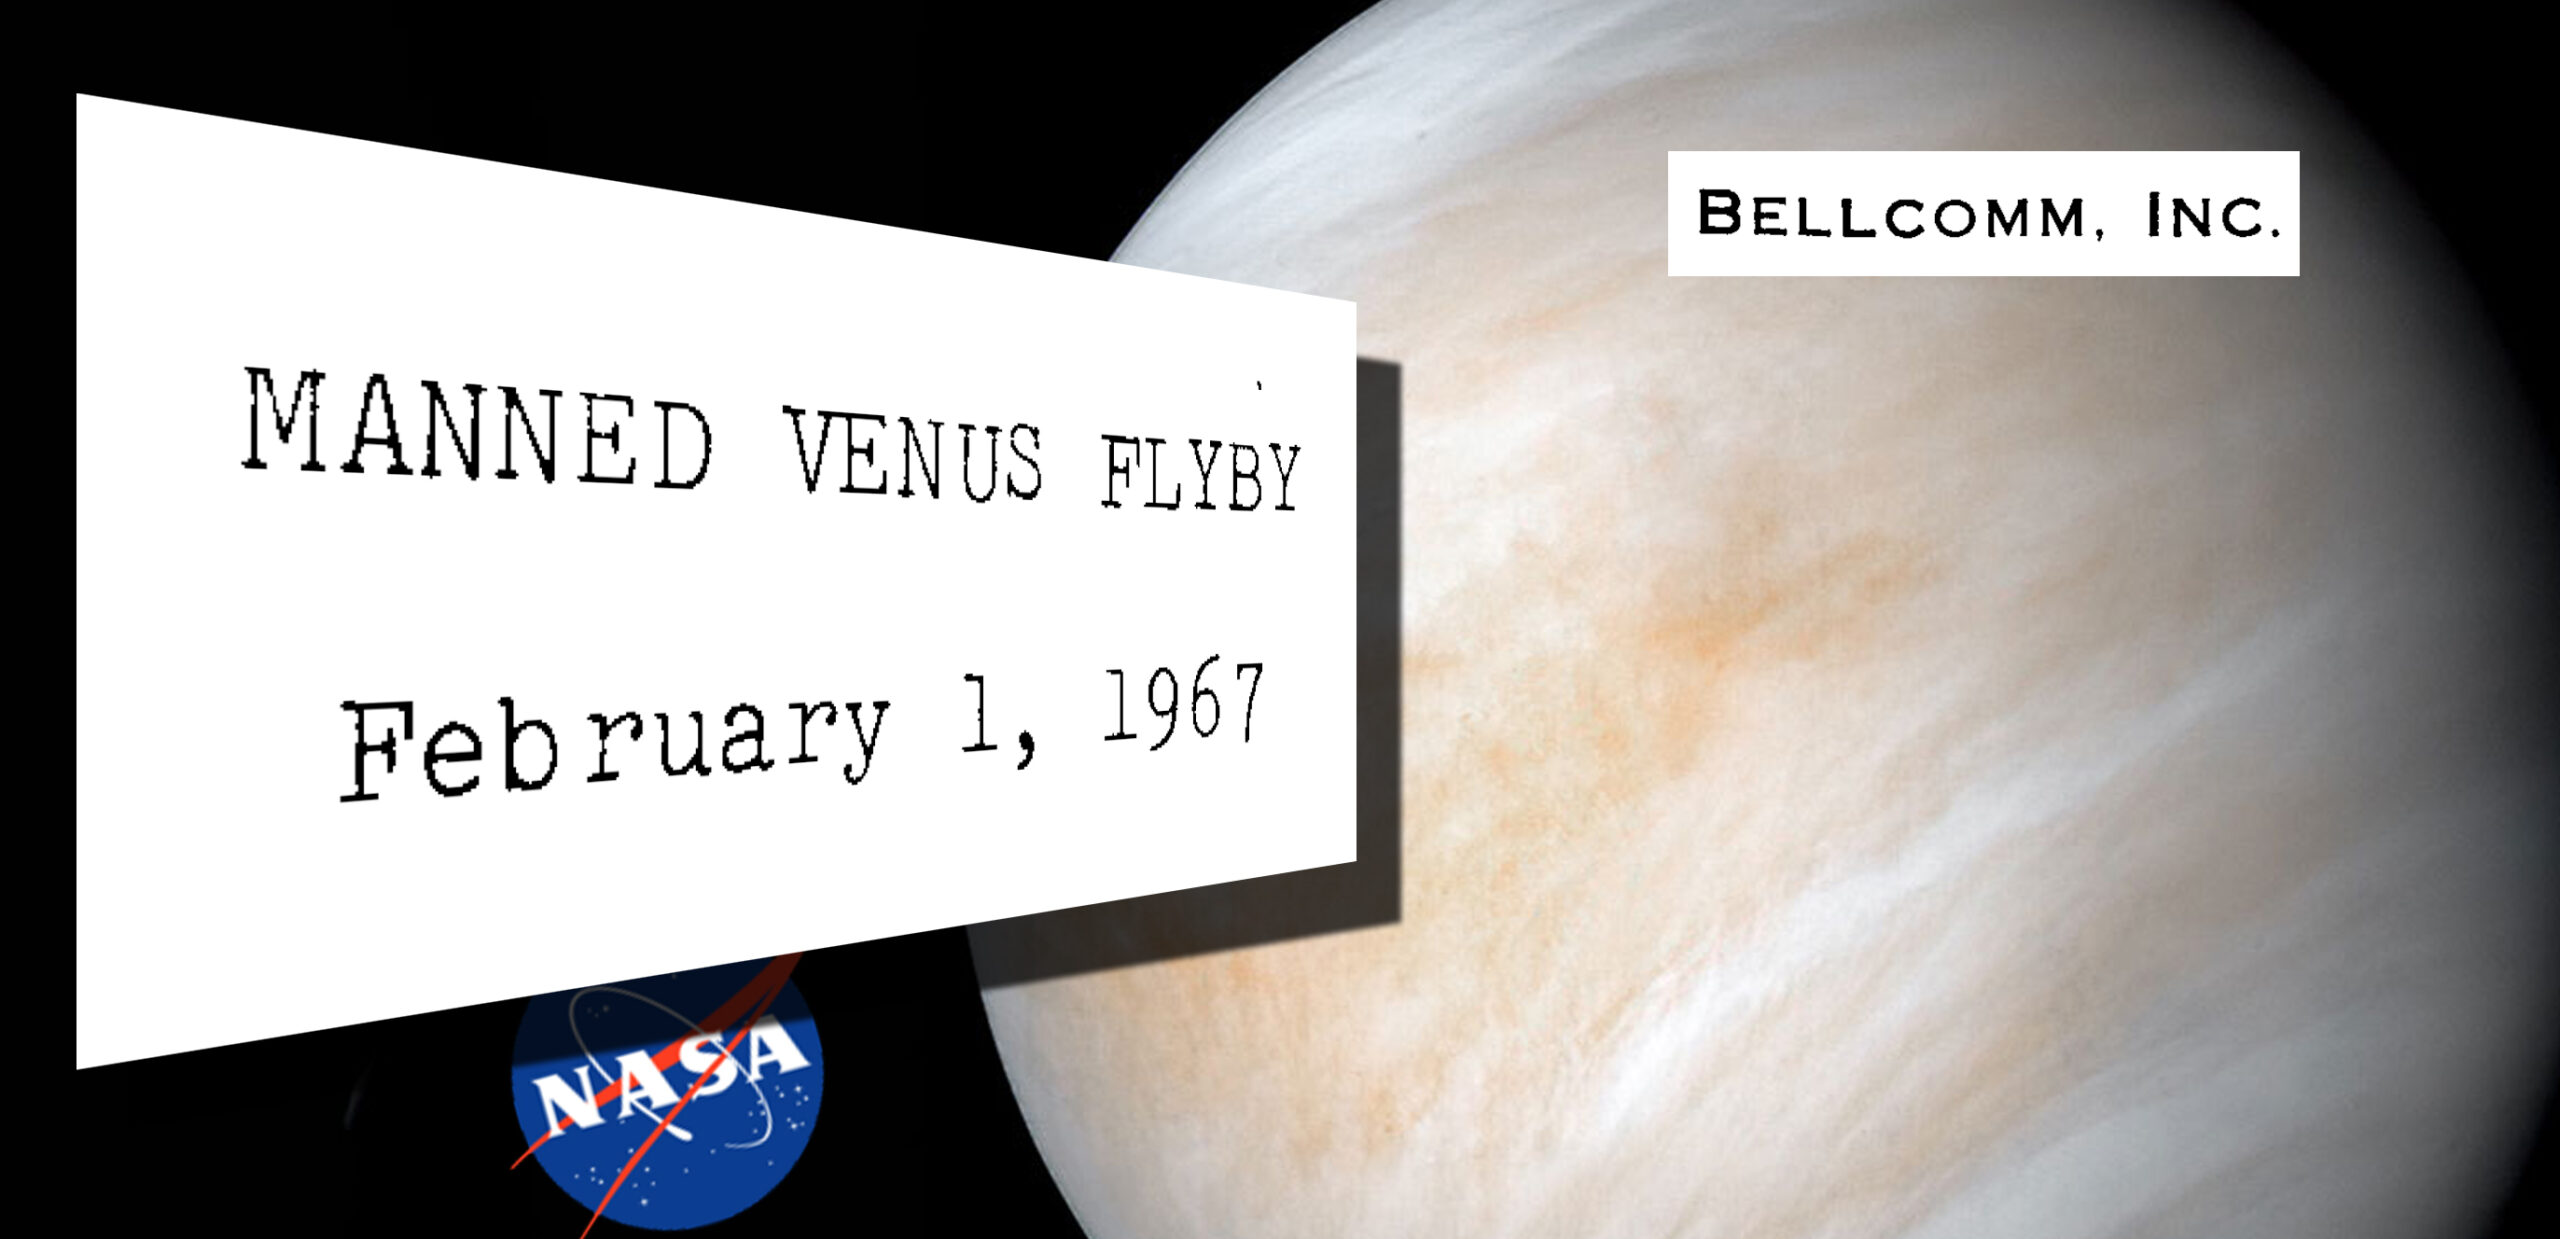 Manned Venus Flyby (Proposal), February 1, 1967